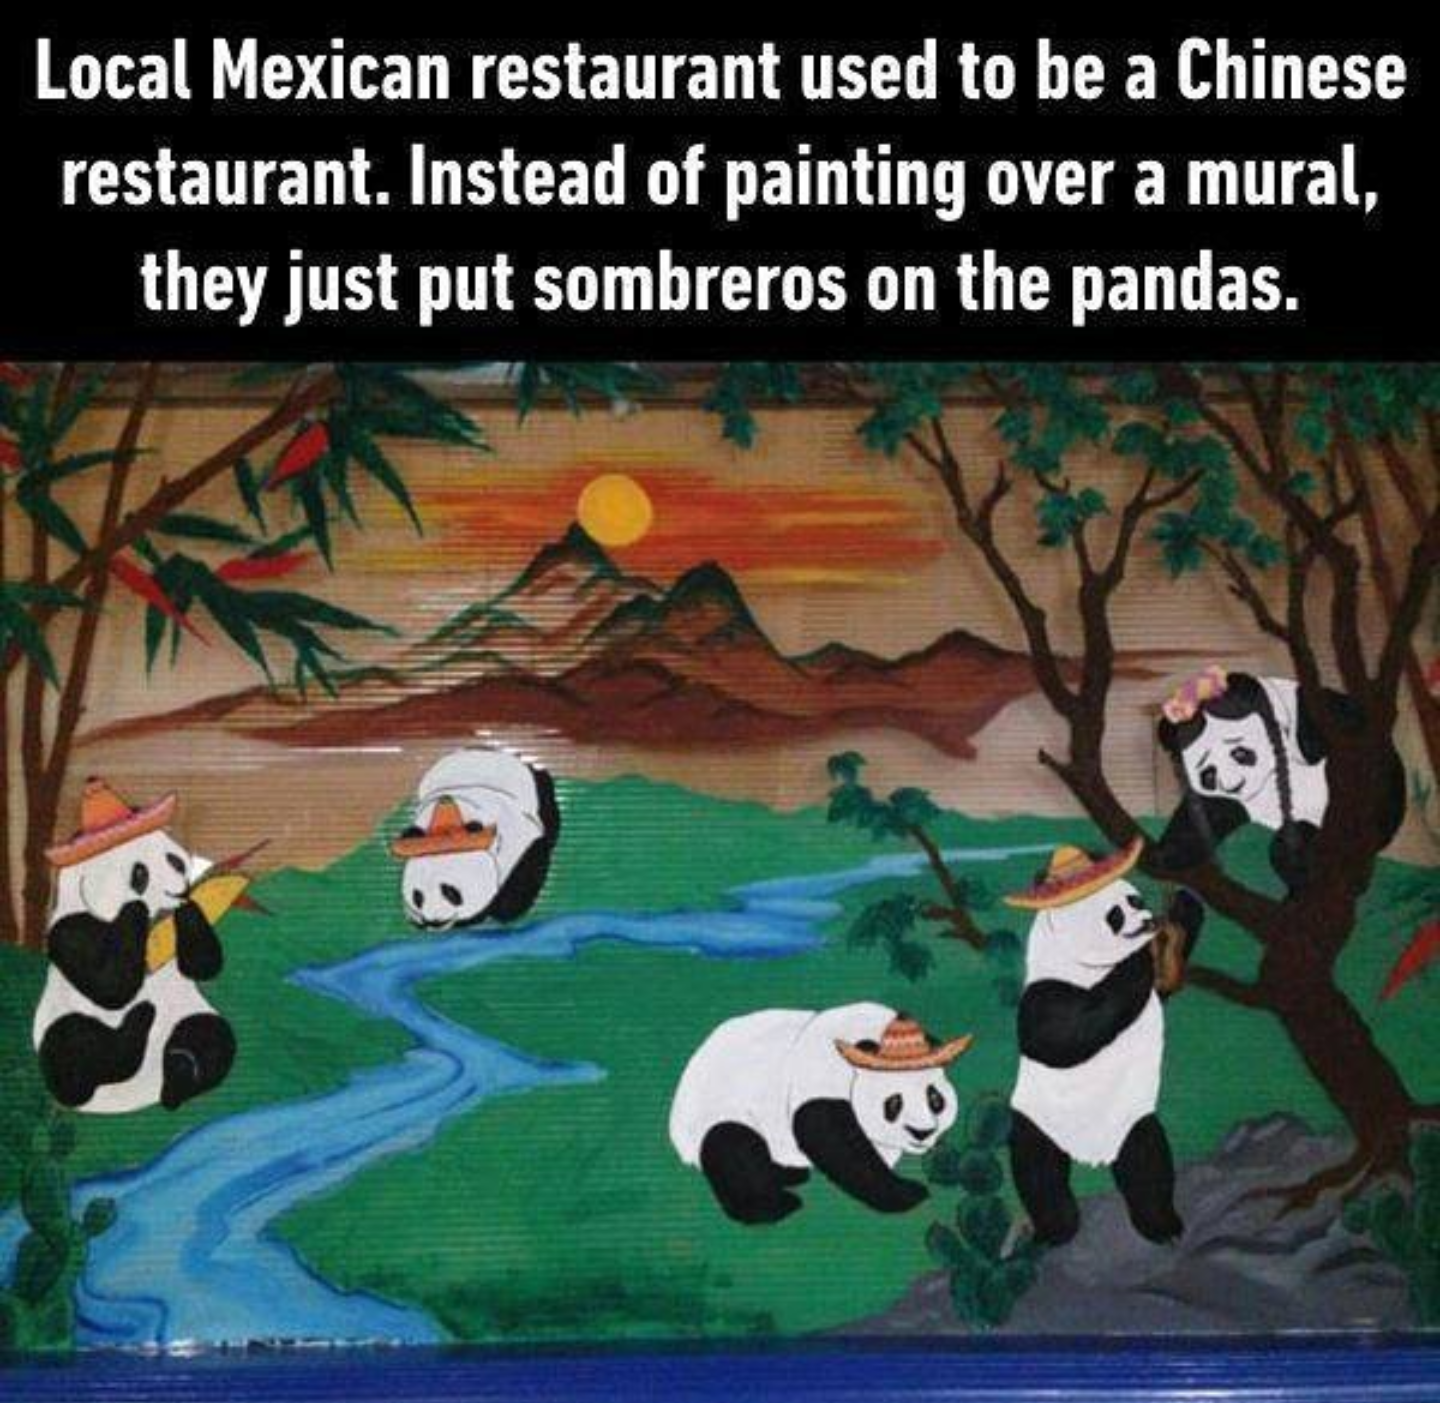 pandas with sombreros - Local Mexican restaurant used to be a Chinese restaurant. Instead of painting over a mural, they just put sombreros on the pandas.